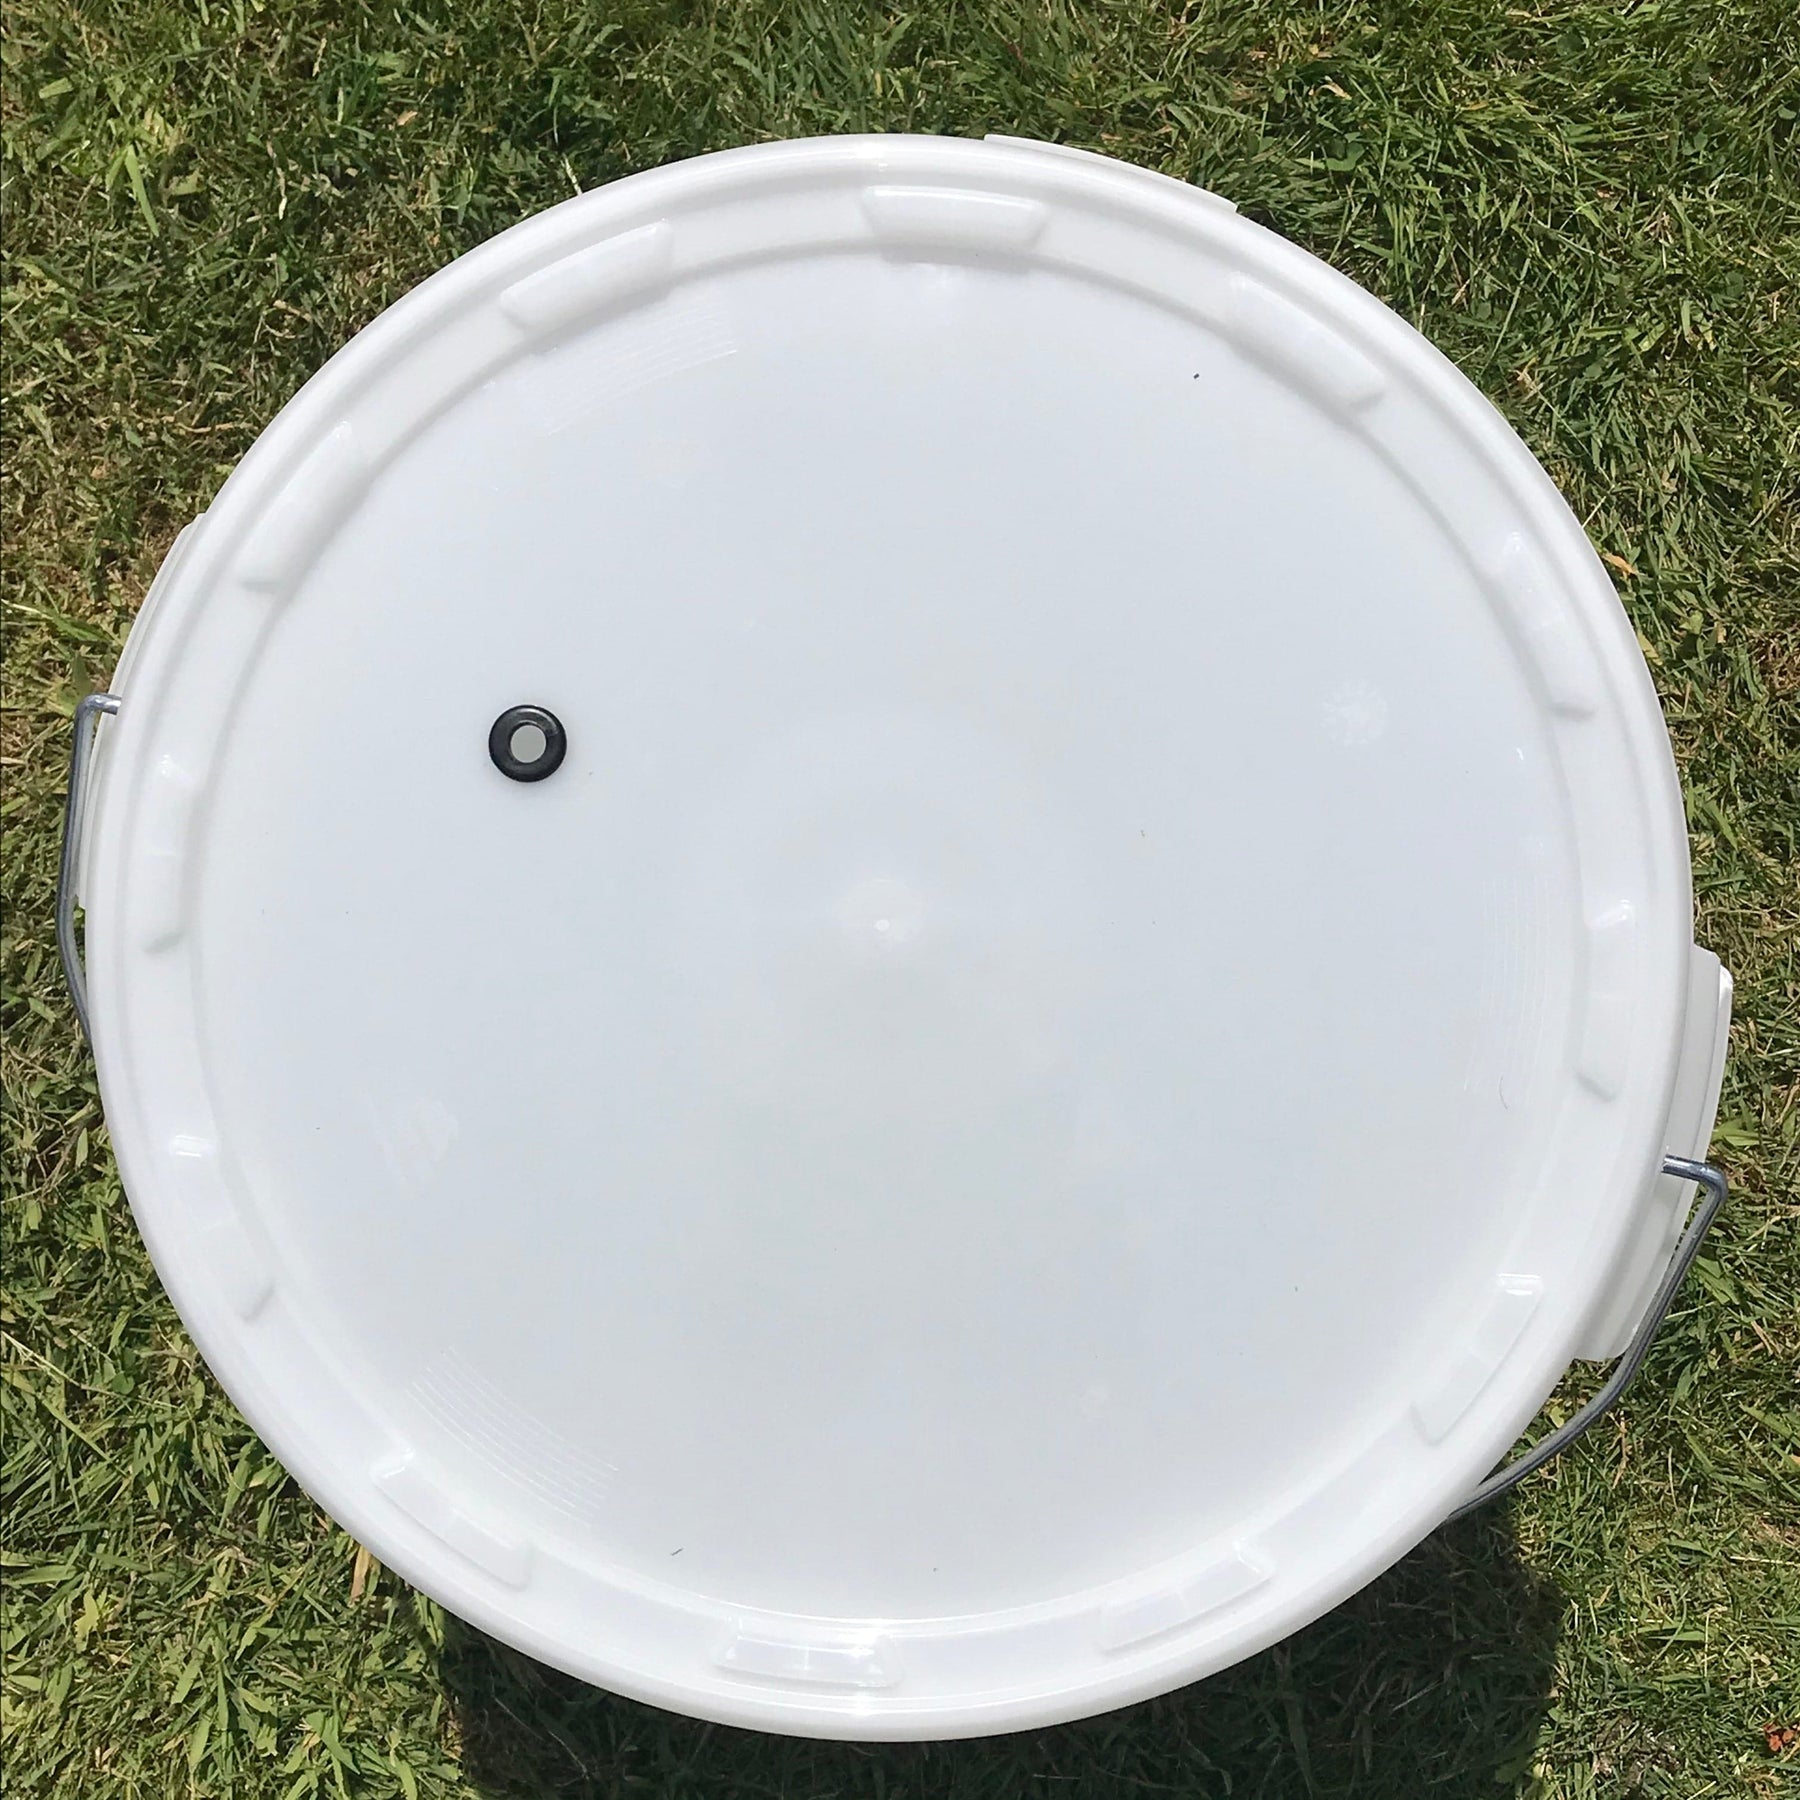 33 Litre Youngs Fermentation Bucket with Lid & Grommet for Airlock